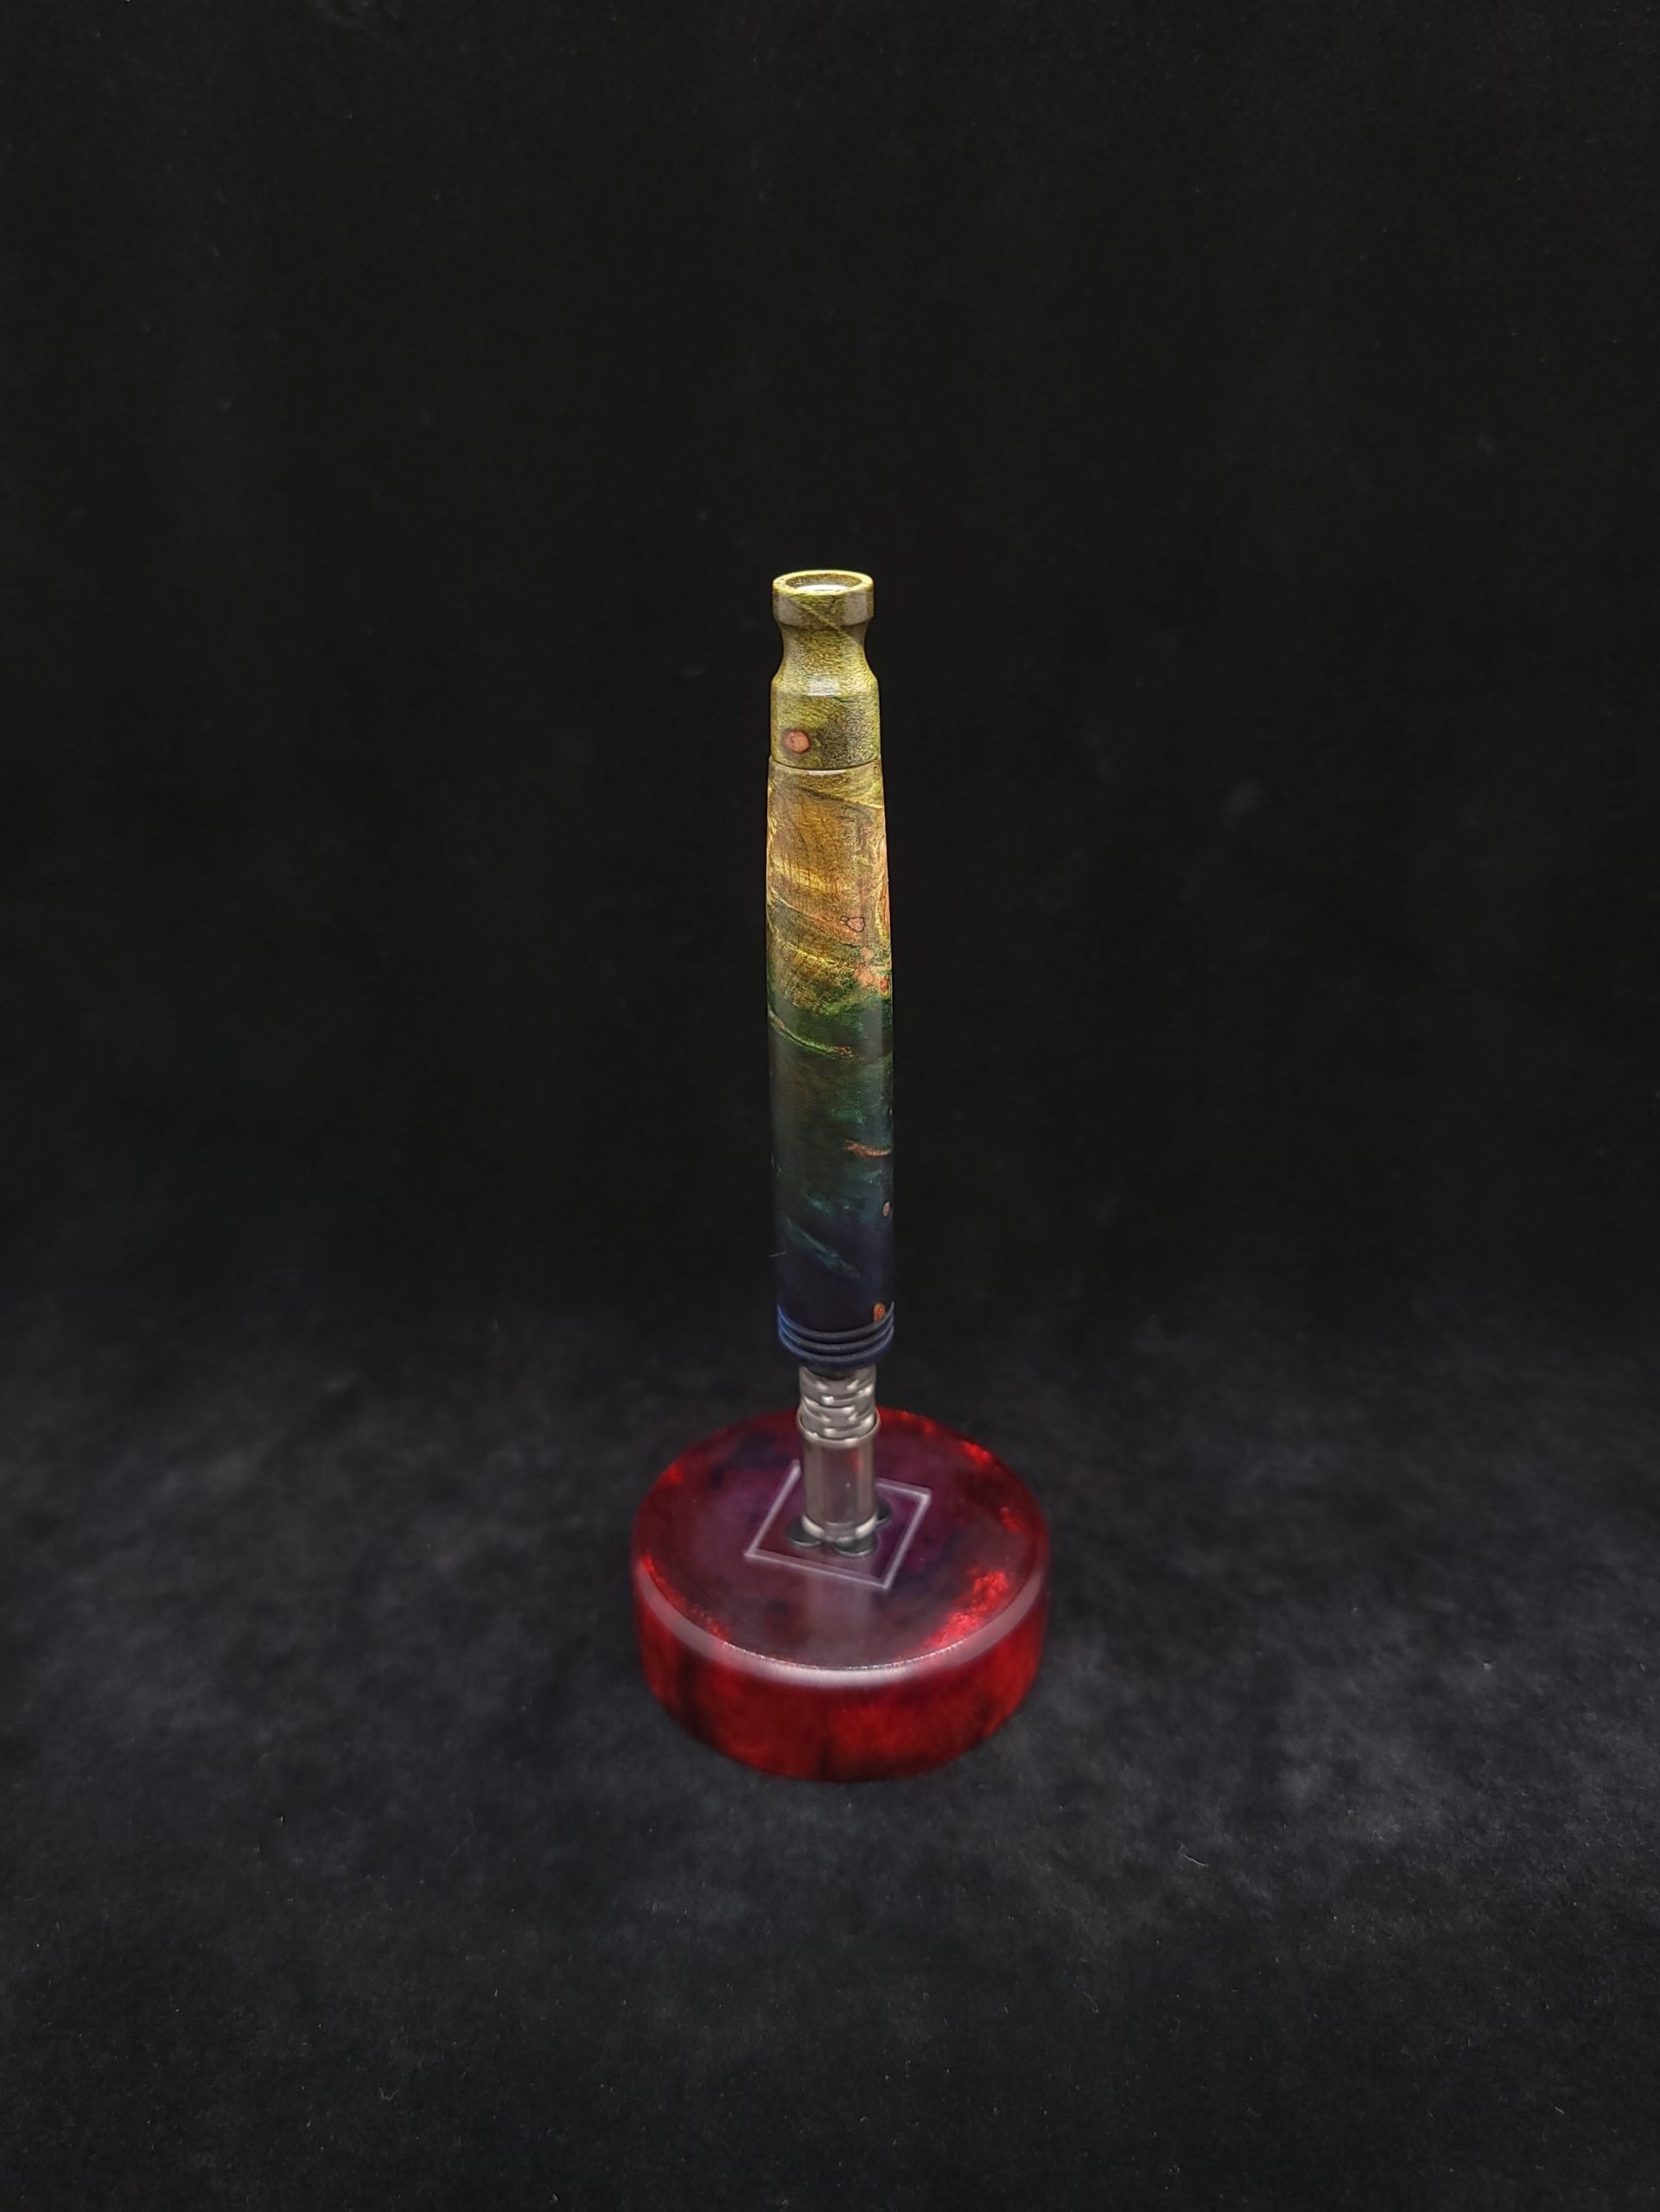 This image portrays Cosmic Burl XL-Straight Taper Dynavap Stem + Matching Mouthpiece by Dovetail Woodwork.